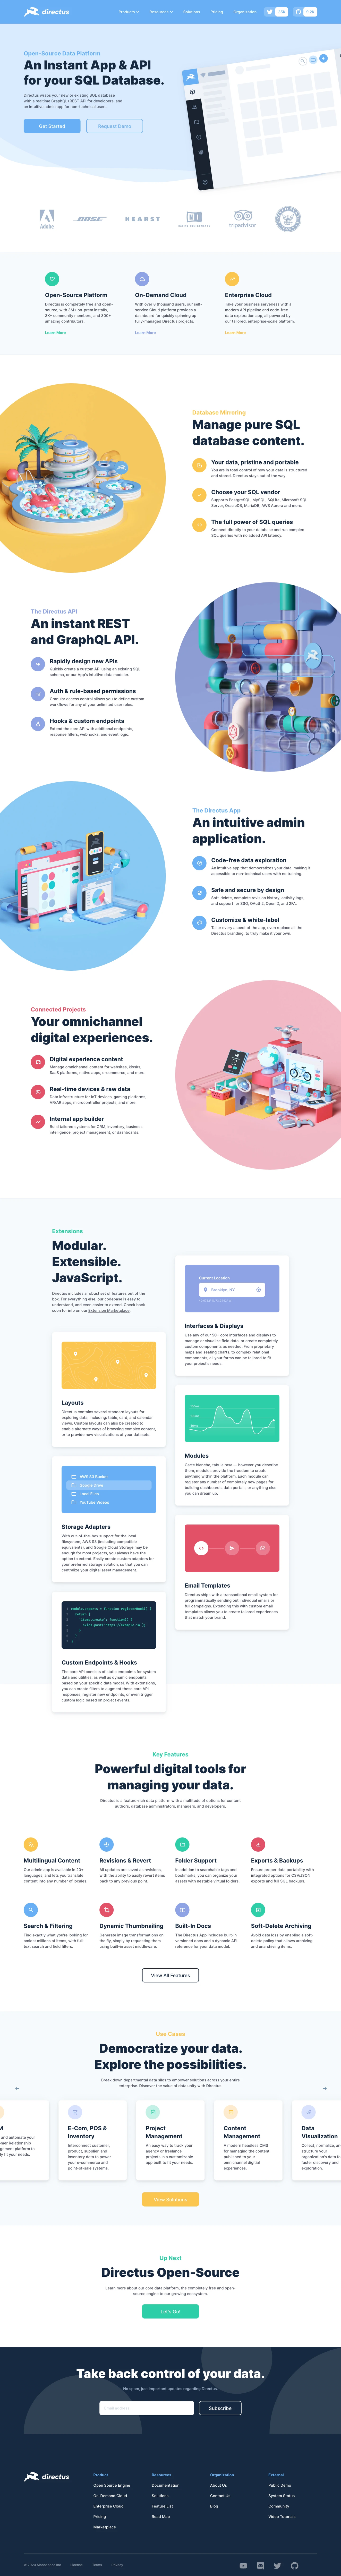 Directus Landing Page Example: Directus is an open-source Headless CMS with the flexibility and power of a Data API. It allows managing both content and raw data, in any new or existing SQL database — keeping all your data pure, organized and portable, end-to-end.